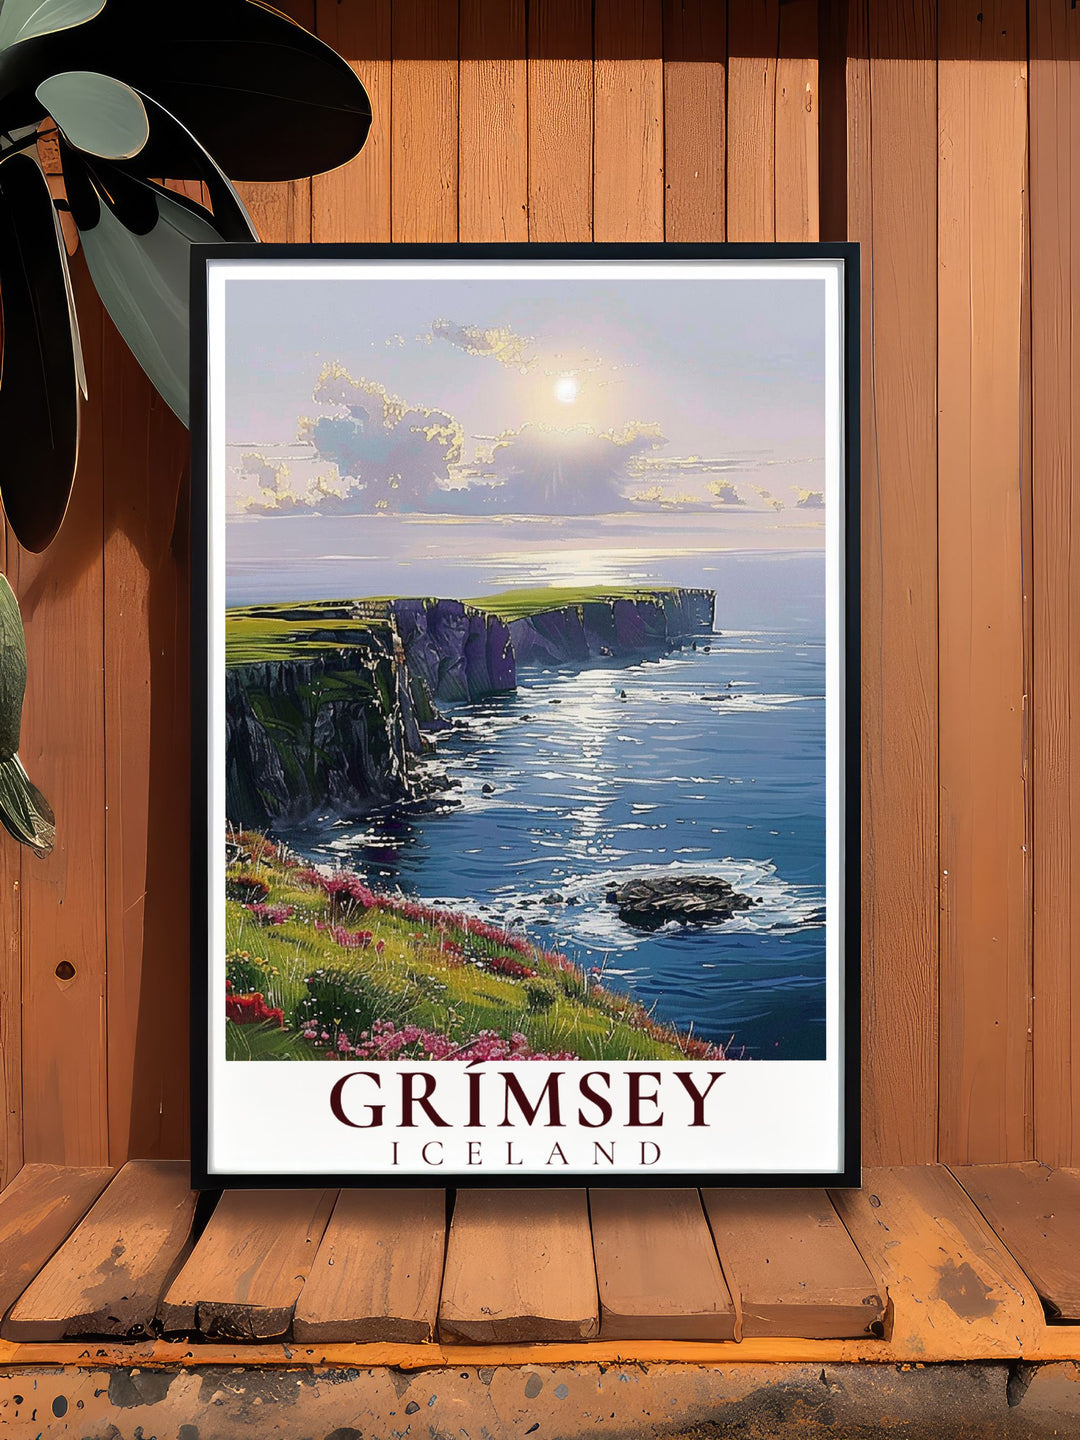 Highlighting the rich history of Grimsey, this travel poster features the iconic lighthouse and rugged coastline, making it a perfect addition for history buffs and nature lovers alike.